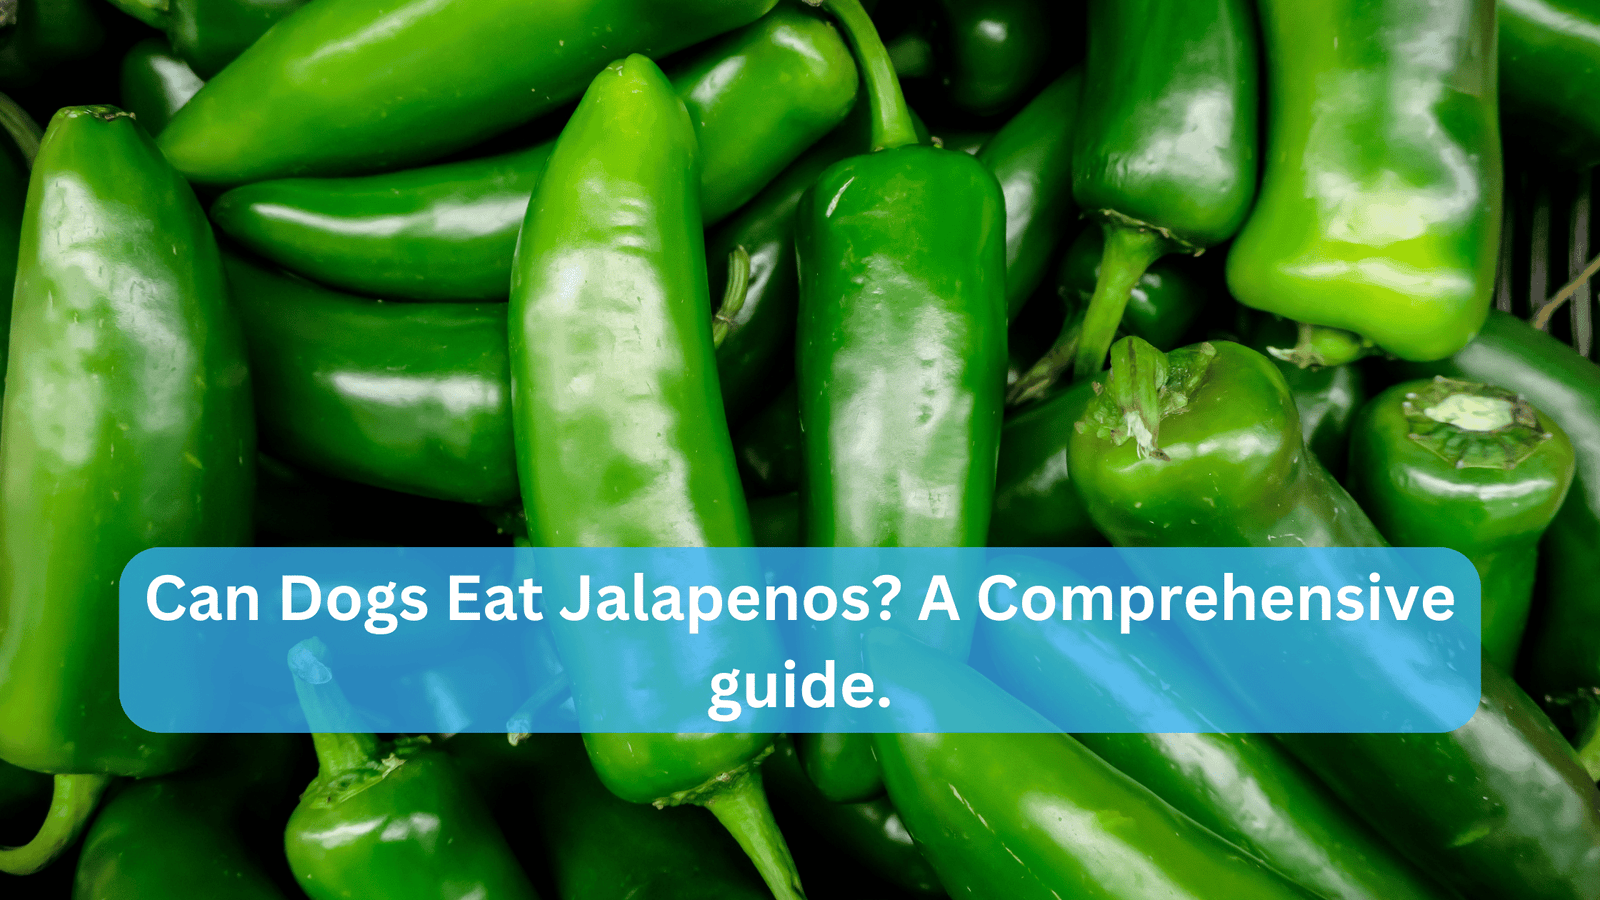 Can Dogs Eat Jalapenos